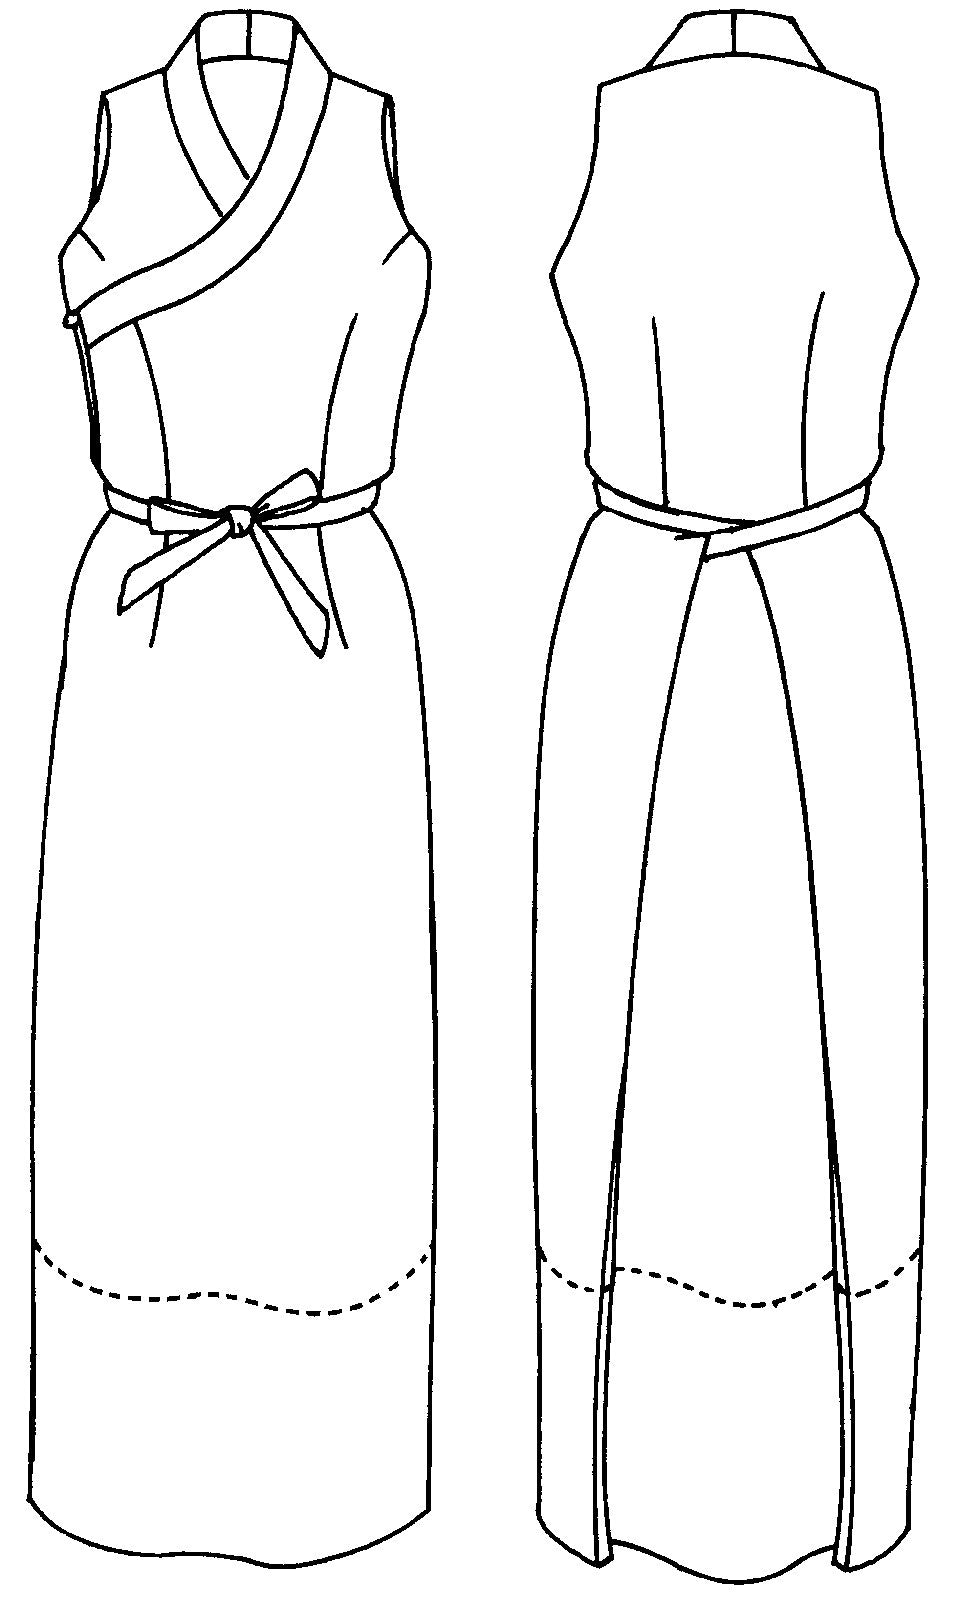 Flat line drawings of front and back views of 131 Tibetan Chupa Jumper.